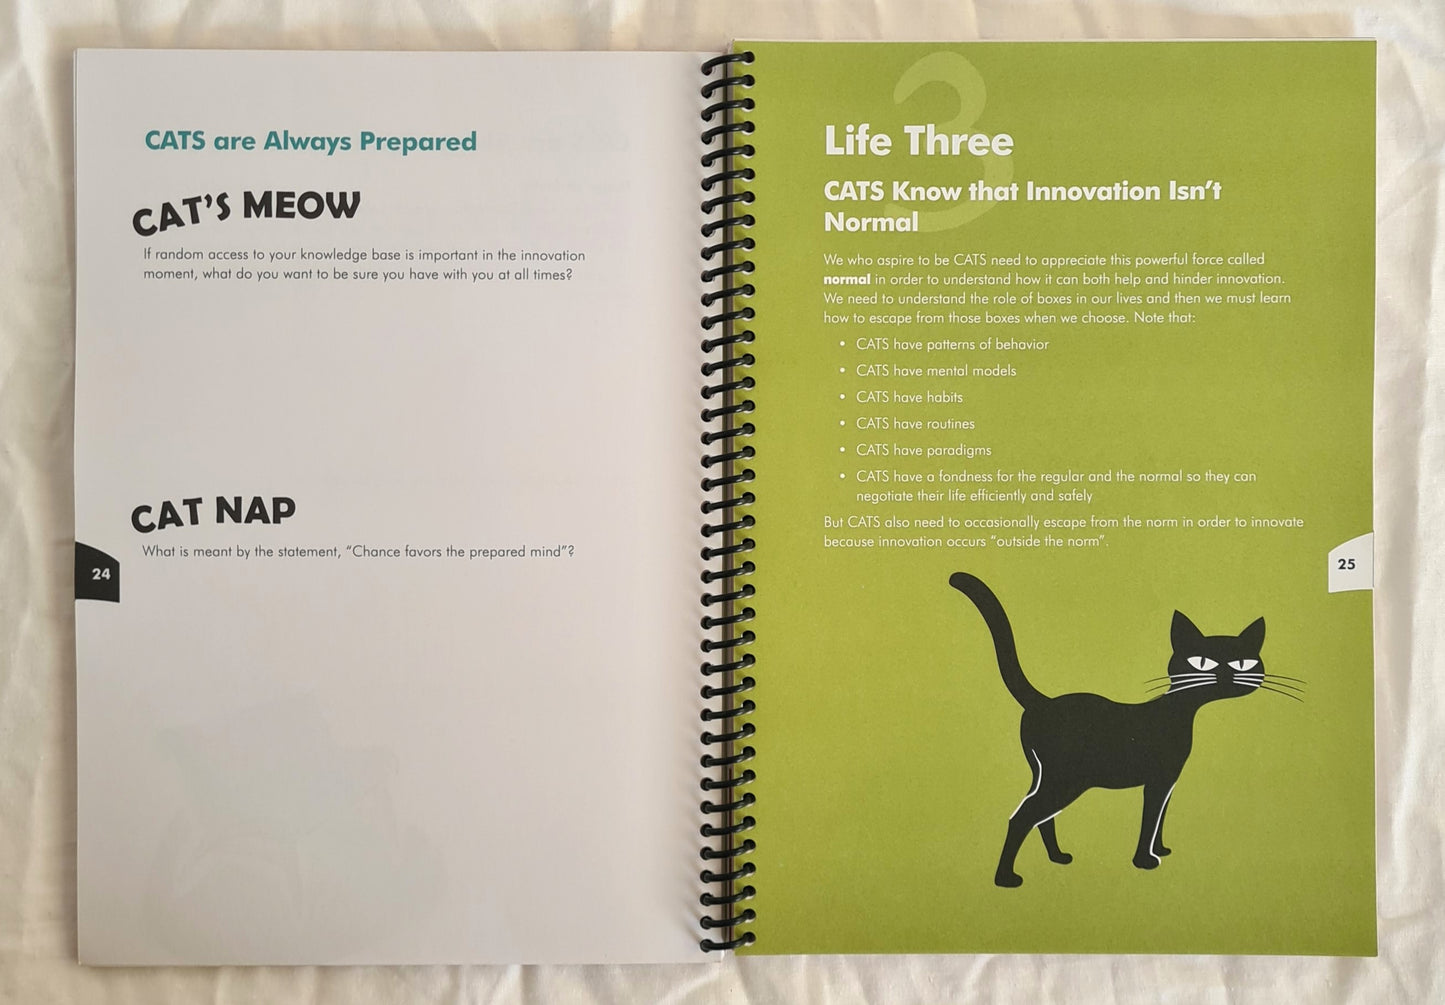 CATS: The Personal Guide by Stephen C. Ludin, Vivienne Anthon, Carolyn Barker and Jimmy Tan